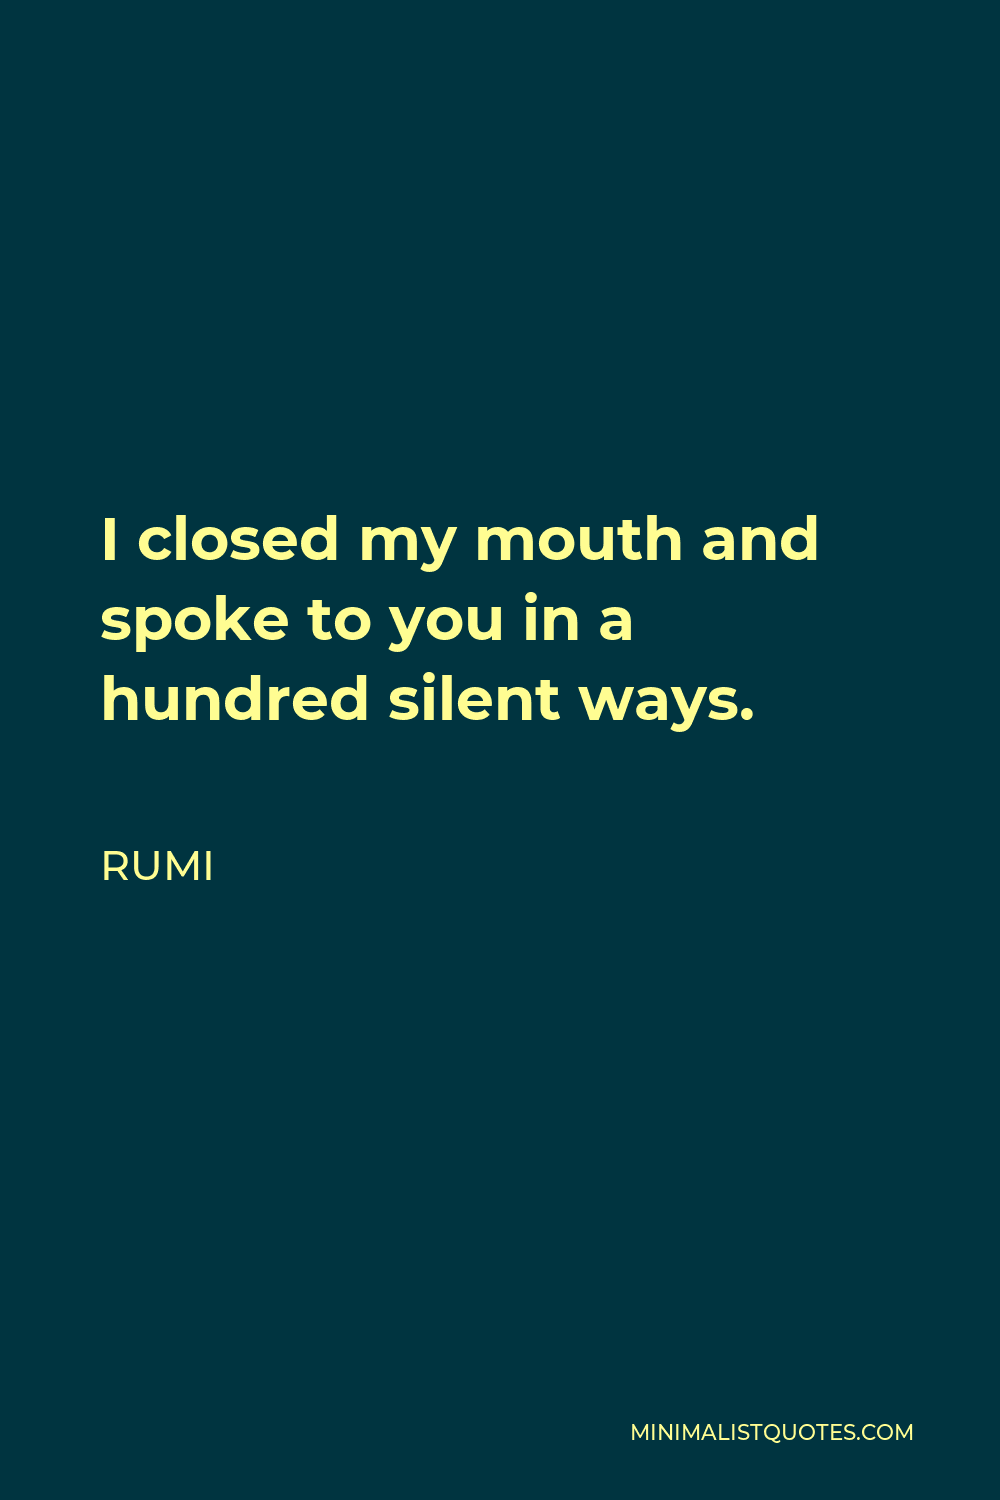 Rumi Quote - I closed my mouth and spoke to you in a hundred silent ways.